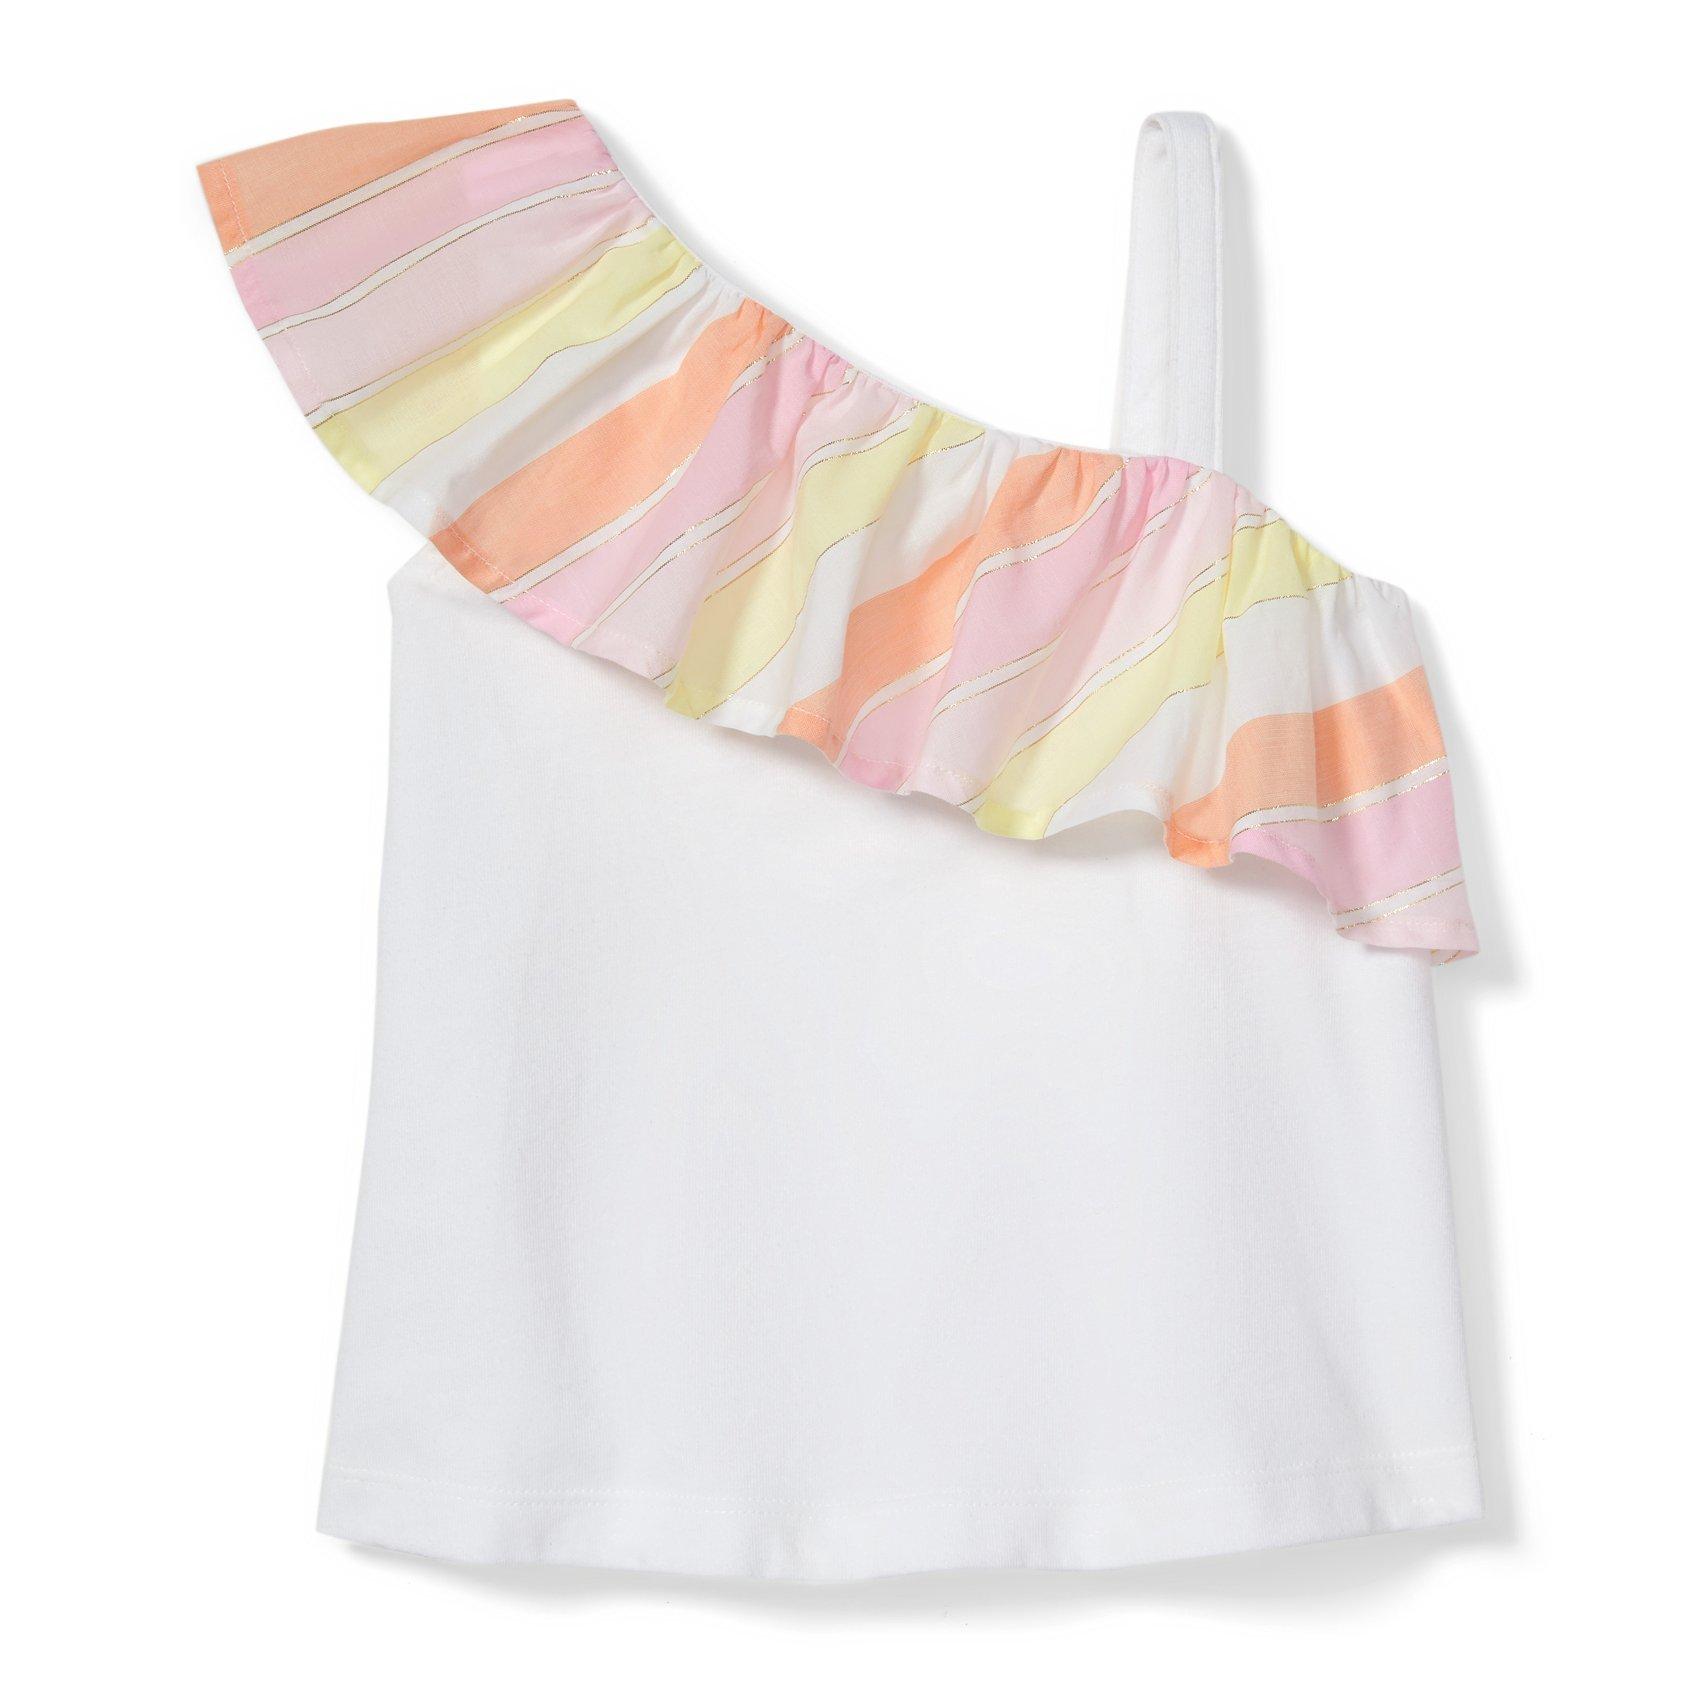 Striped Ruffle Top image number 0